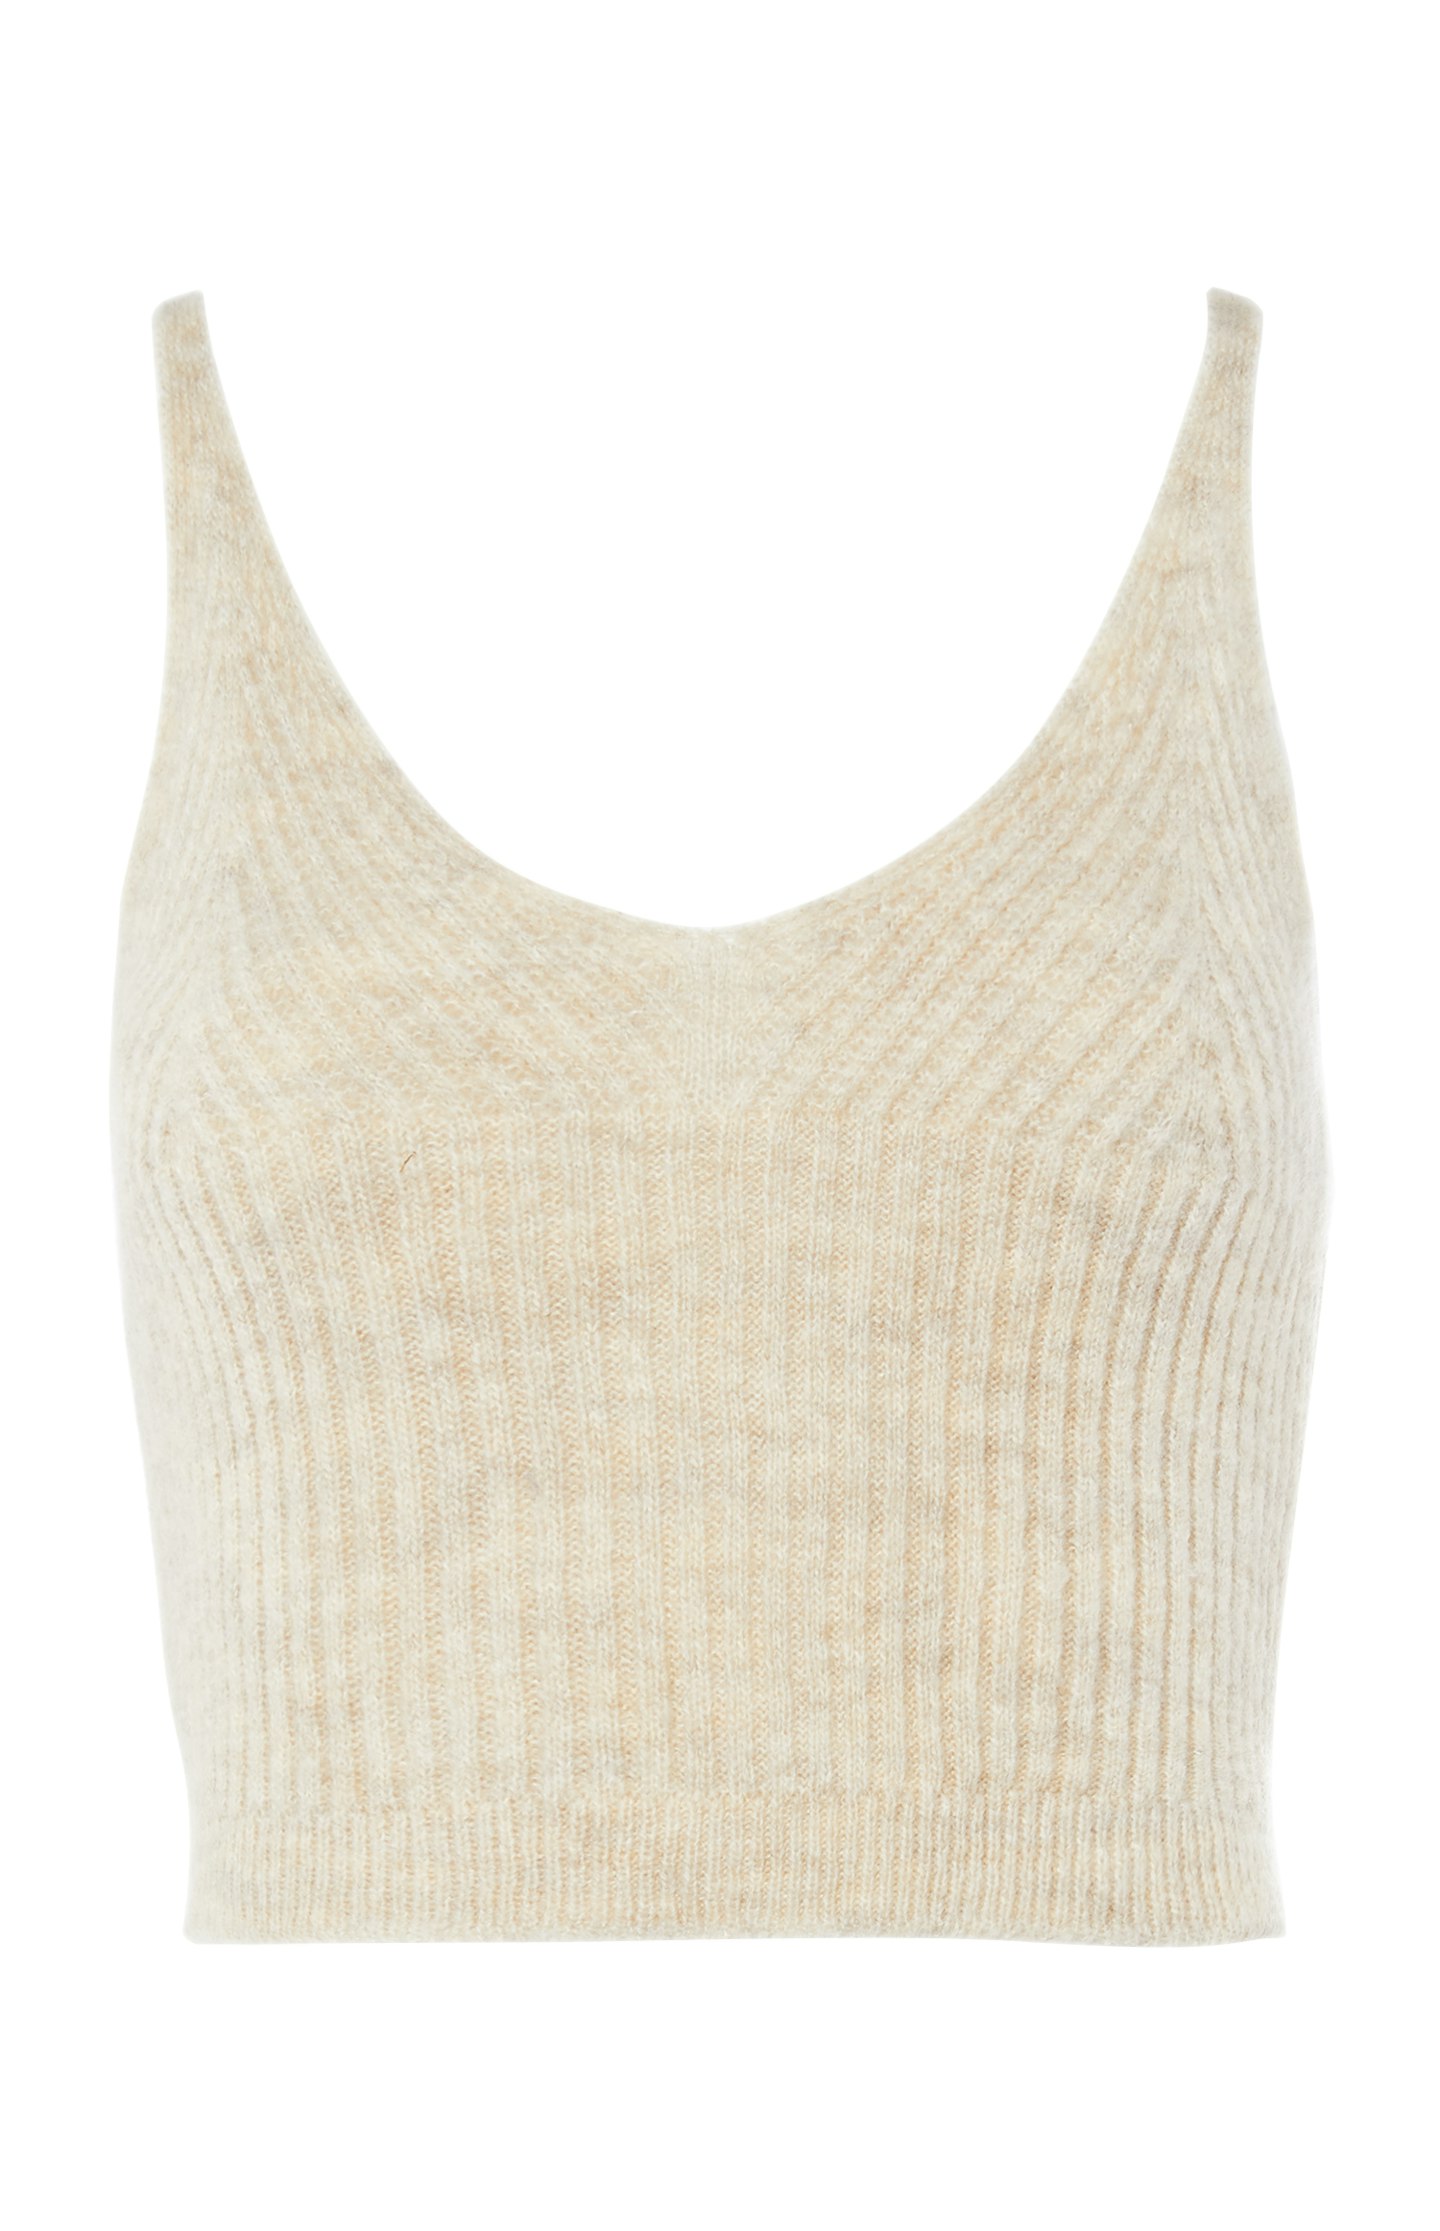 Primark, Cream Top, £8, Available In-Store Next Week